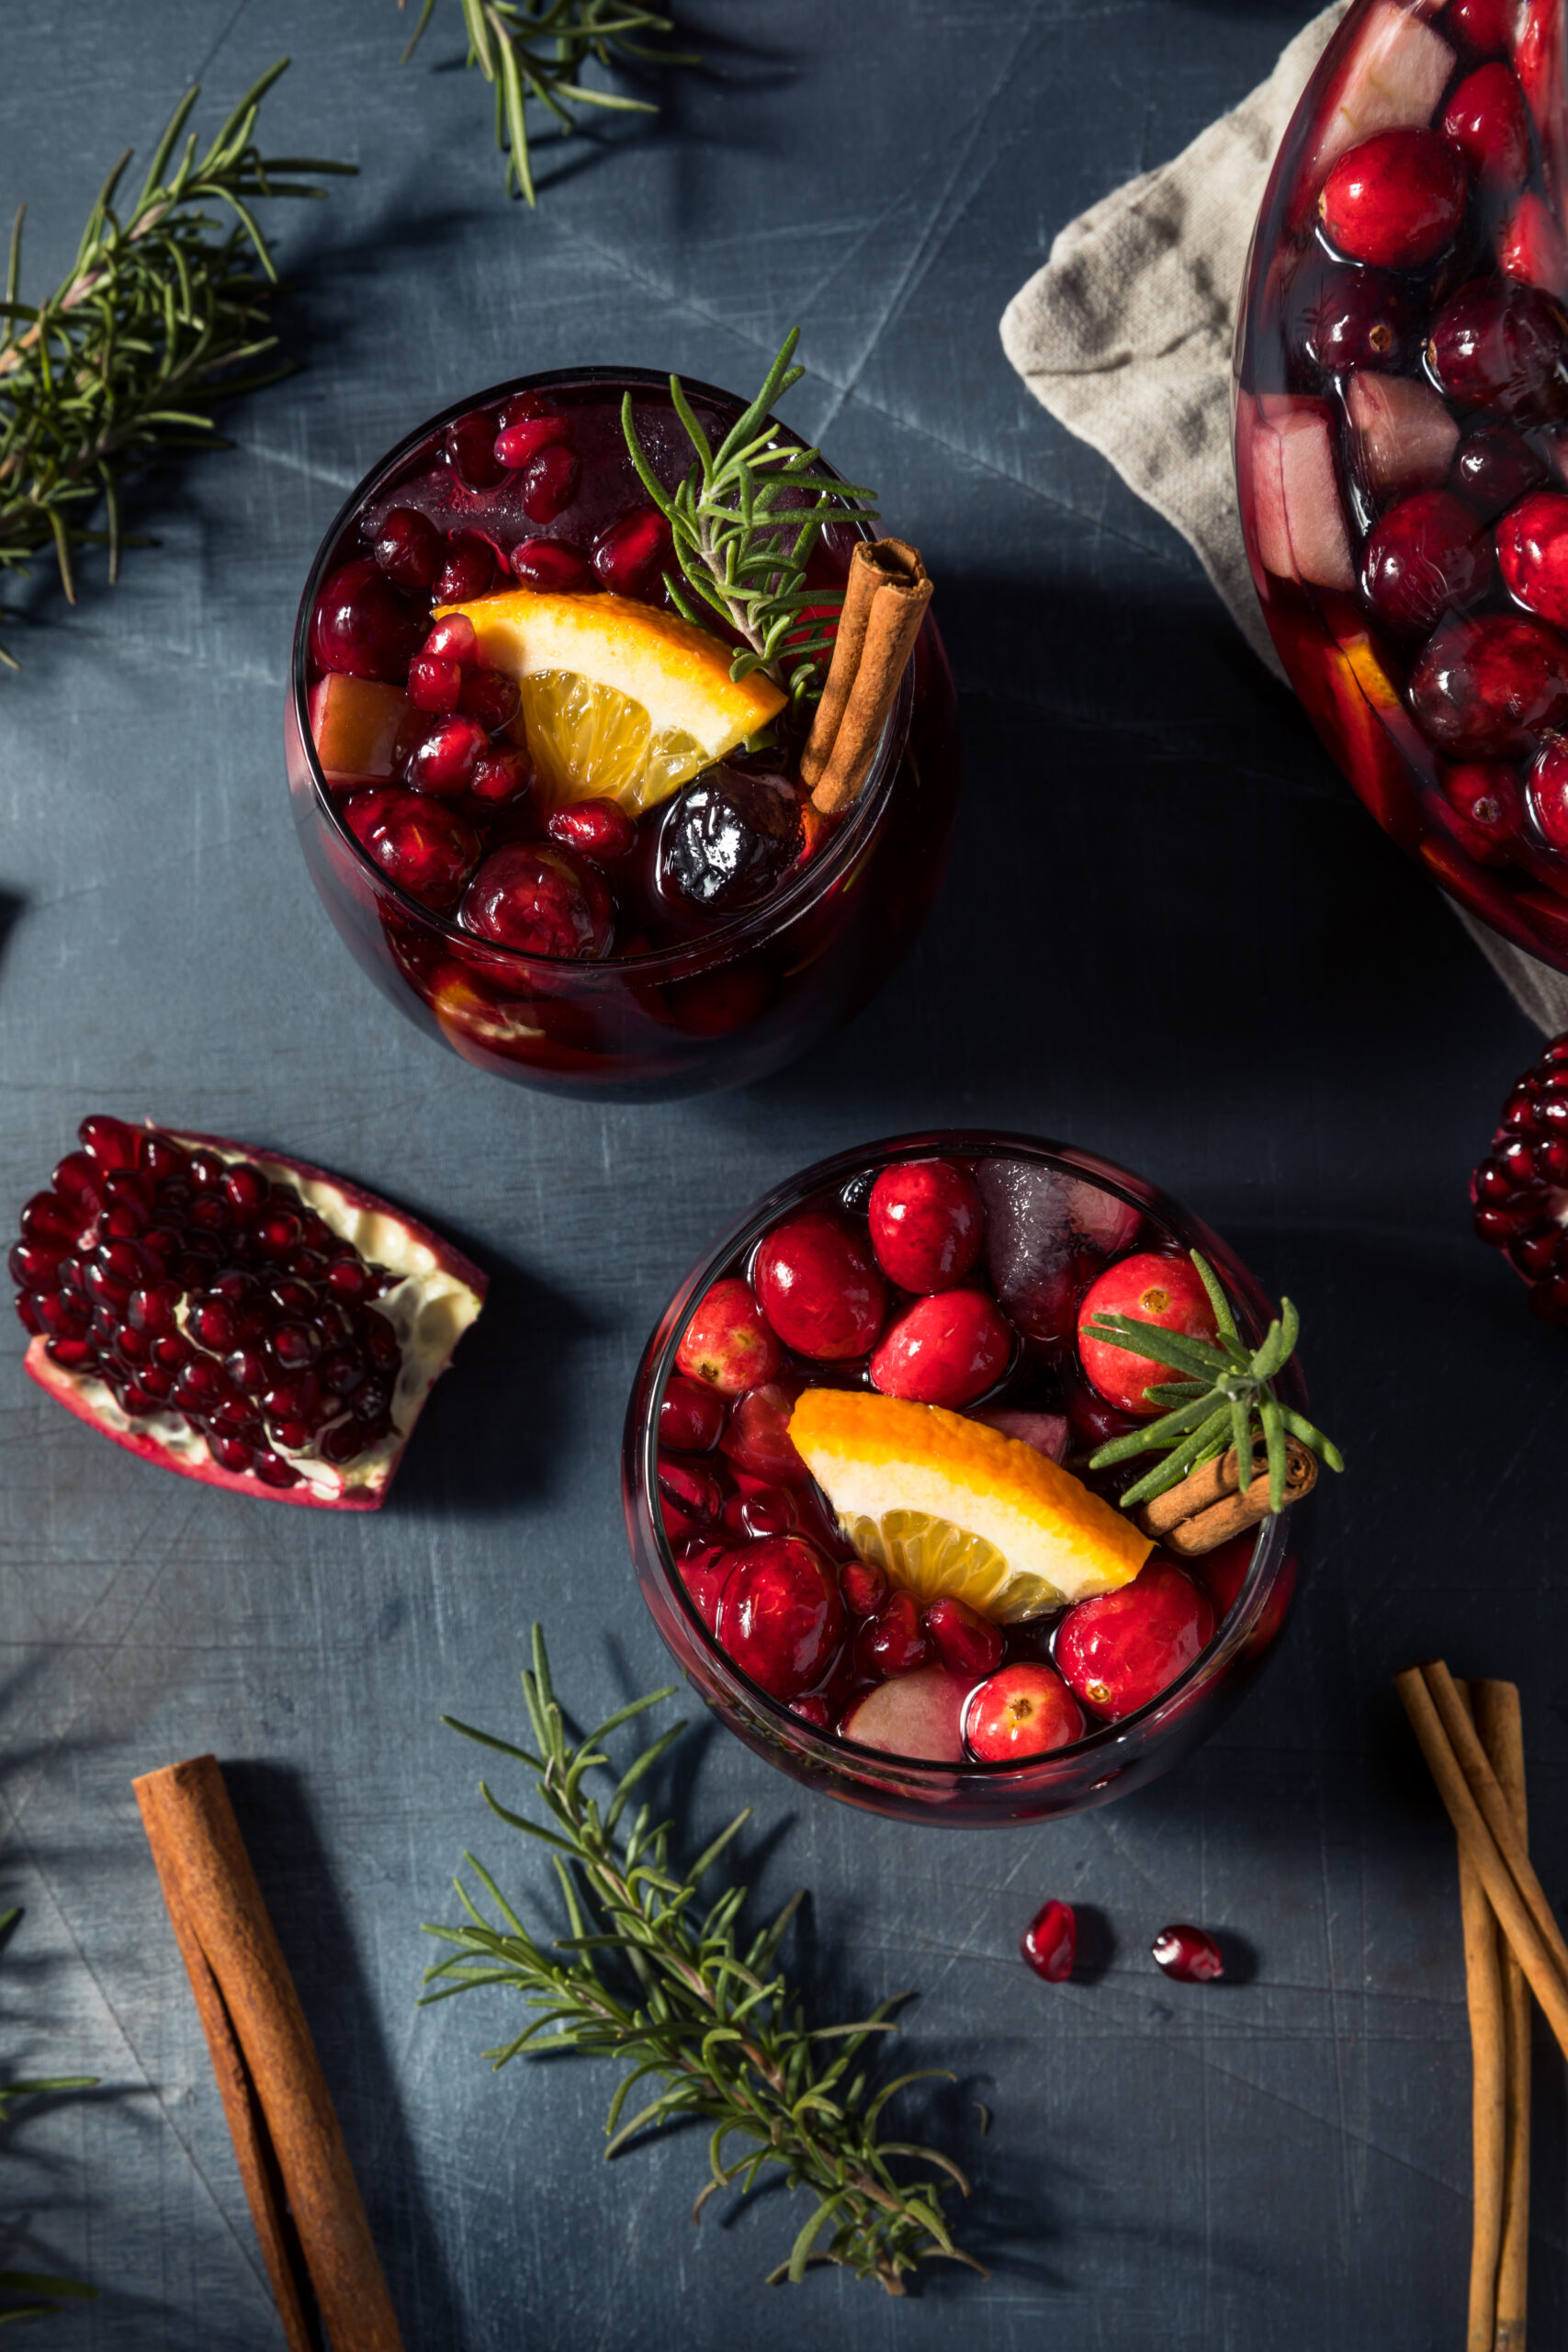 Red Christmas Sangria Recipe; made with red wine, brandy cranberry pomegranate juice, sparkling apple cider and fruit. Topped with cinnamon sticks and rosemary to garnish